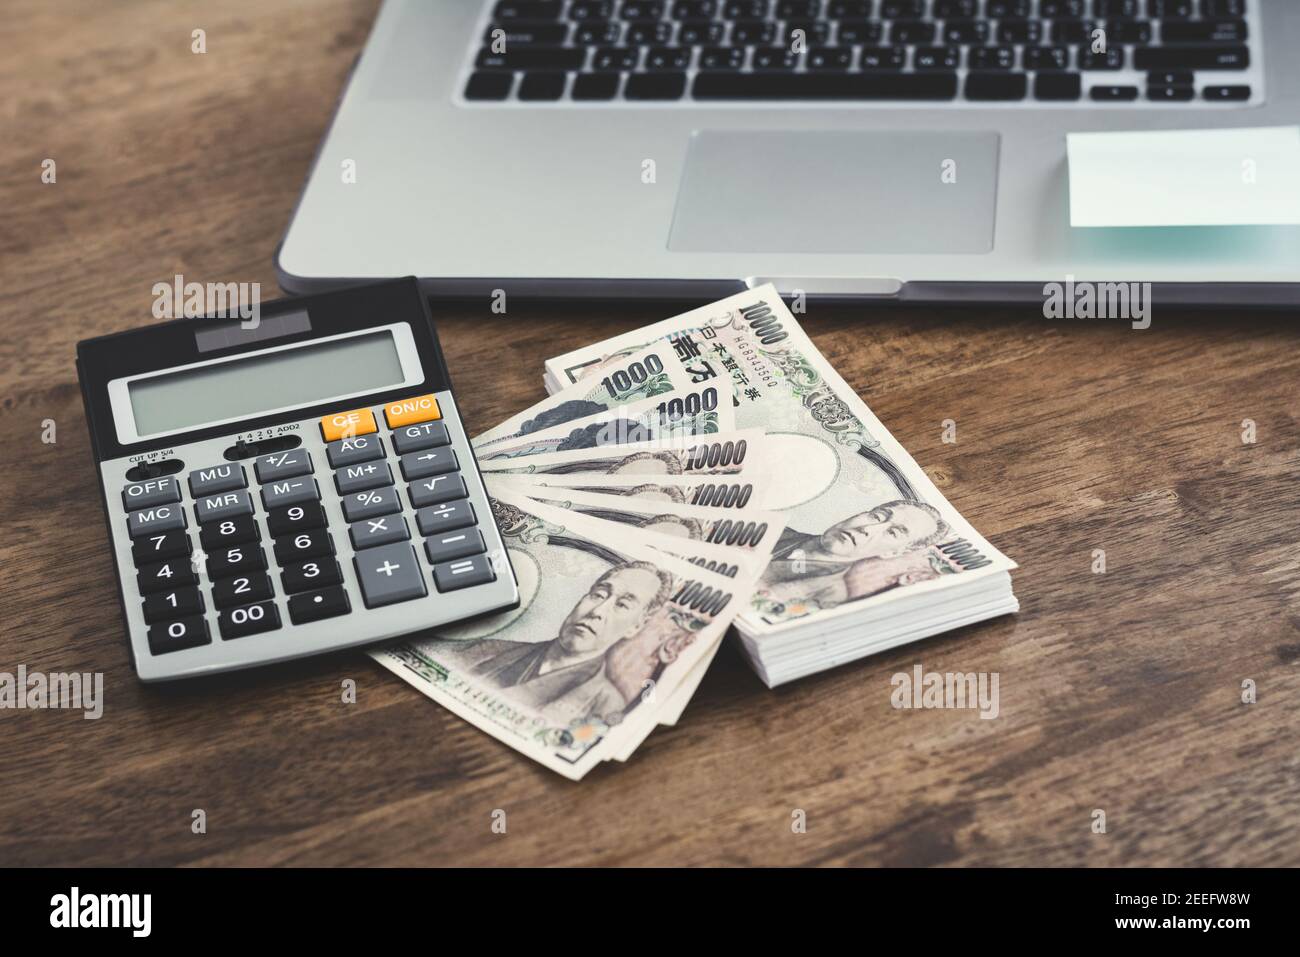 Money, Japanese yen banknotes, with calculator and notebook computer on wood table Stock Photo